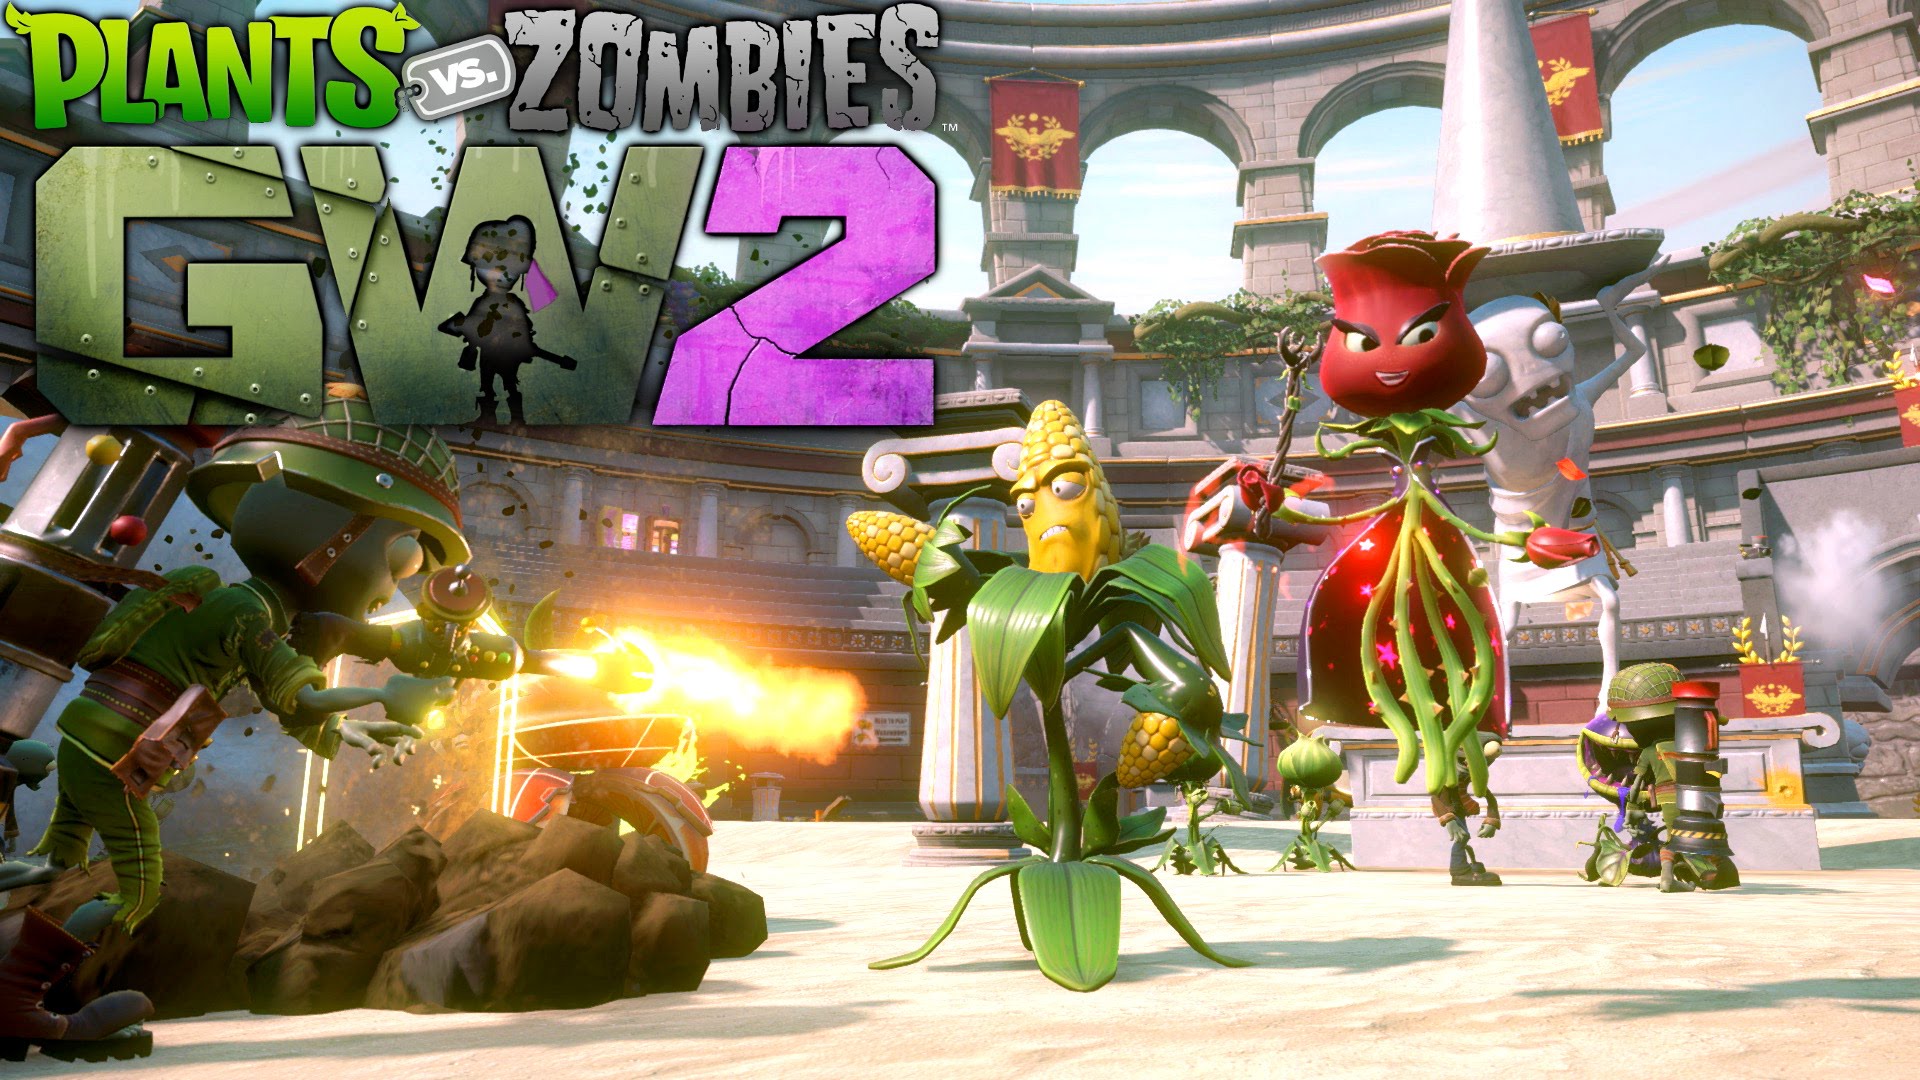 Featured Image for Plants vs Zombies Garden Warfare 2 